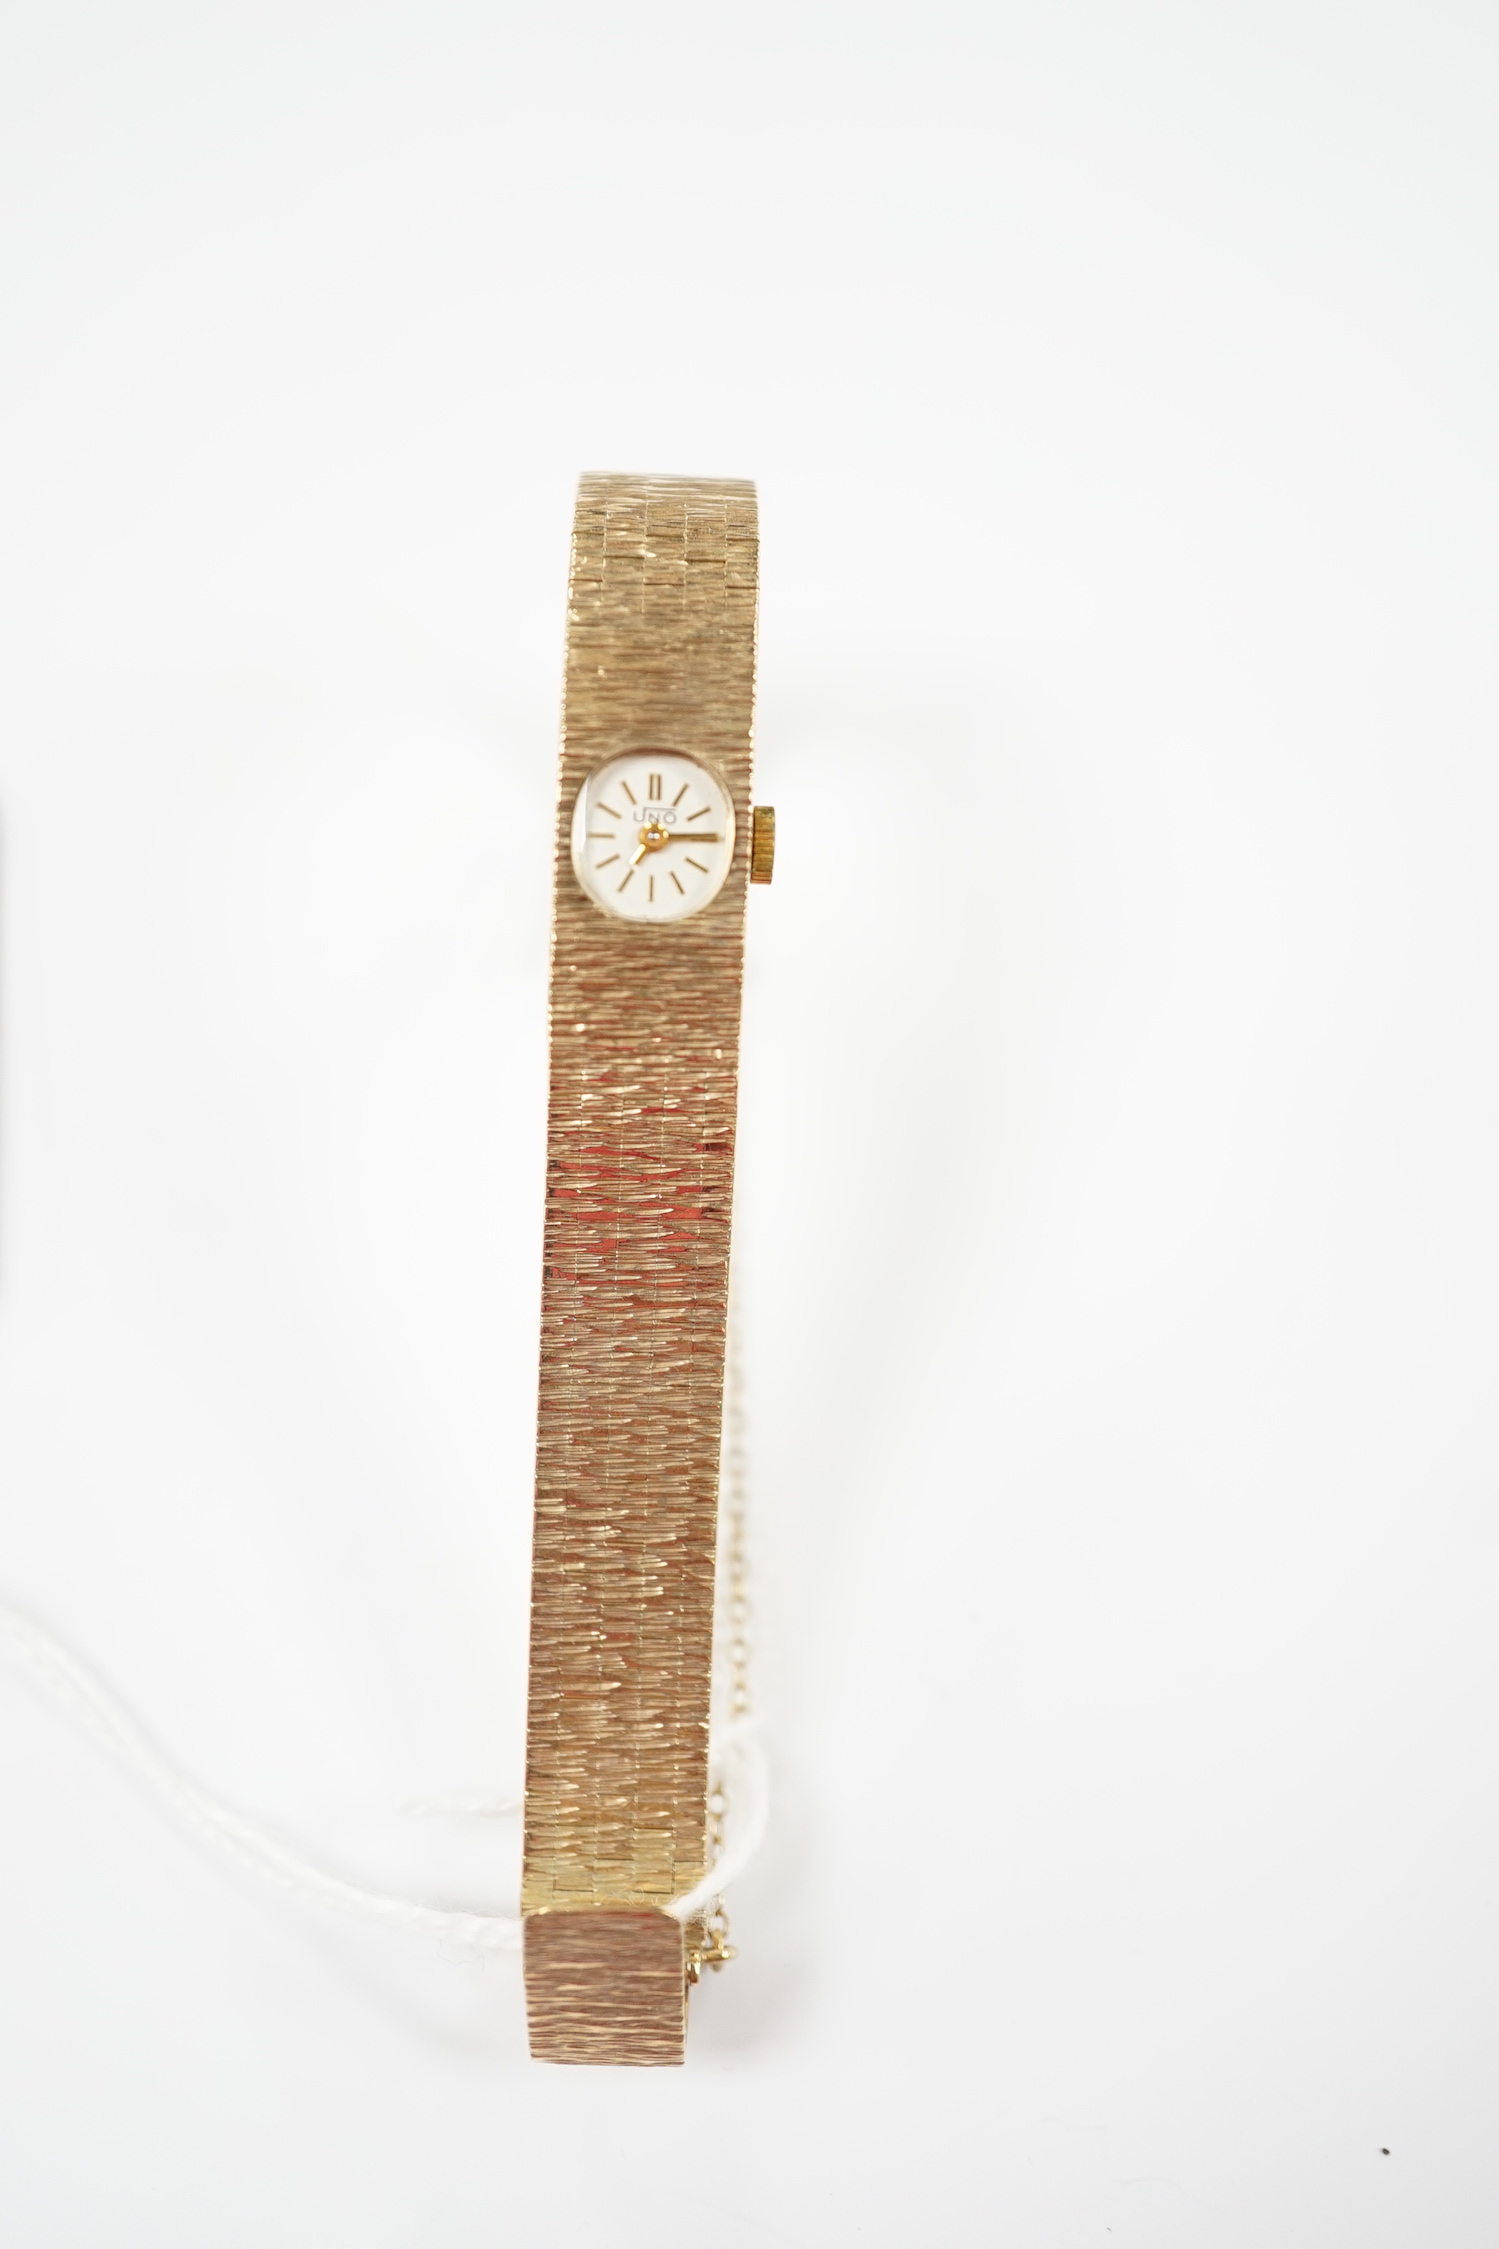 A lady's 1970's 9ct. gold Uno manual wind bracelet wrist watch with a bark textured bracelet, - Image 3 of 4